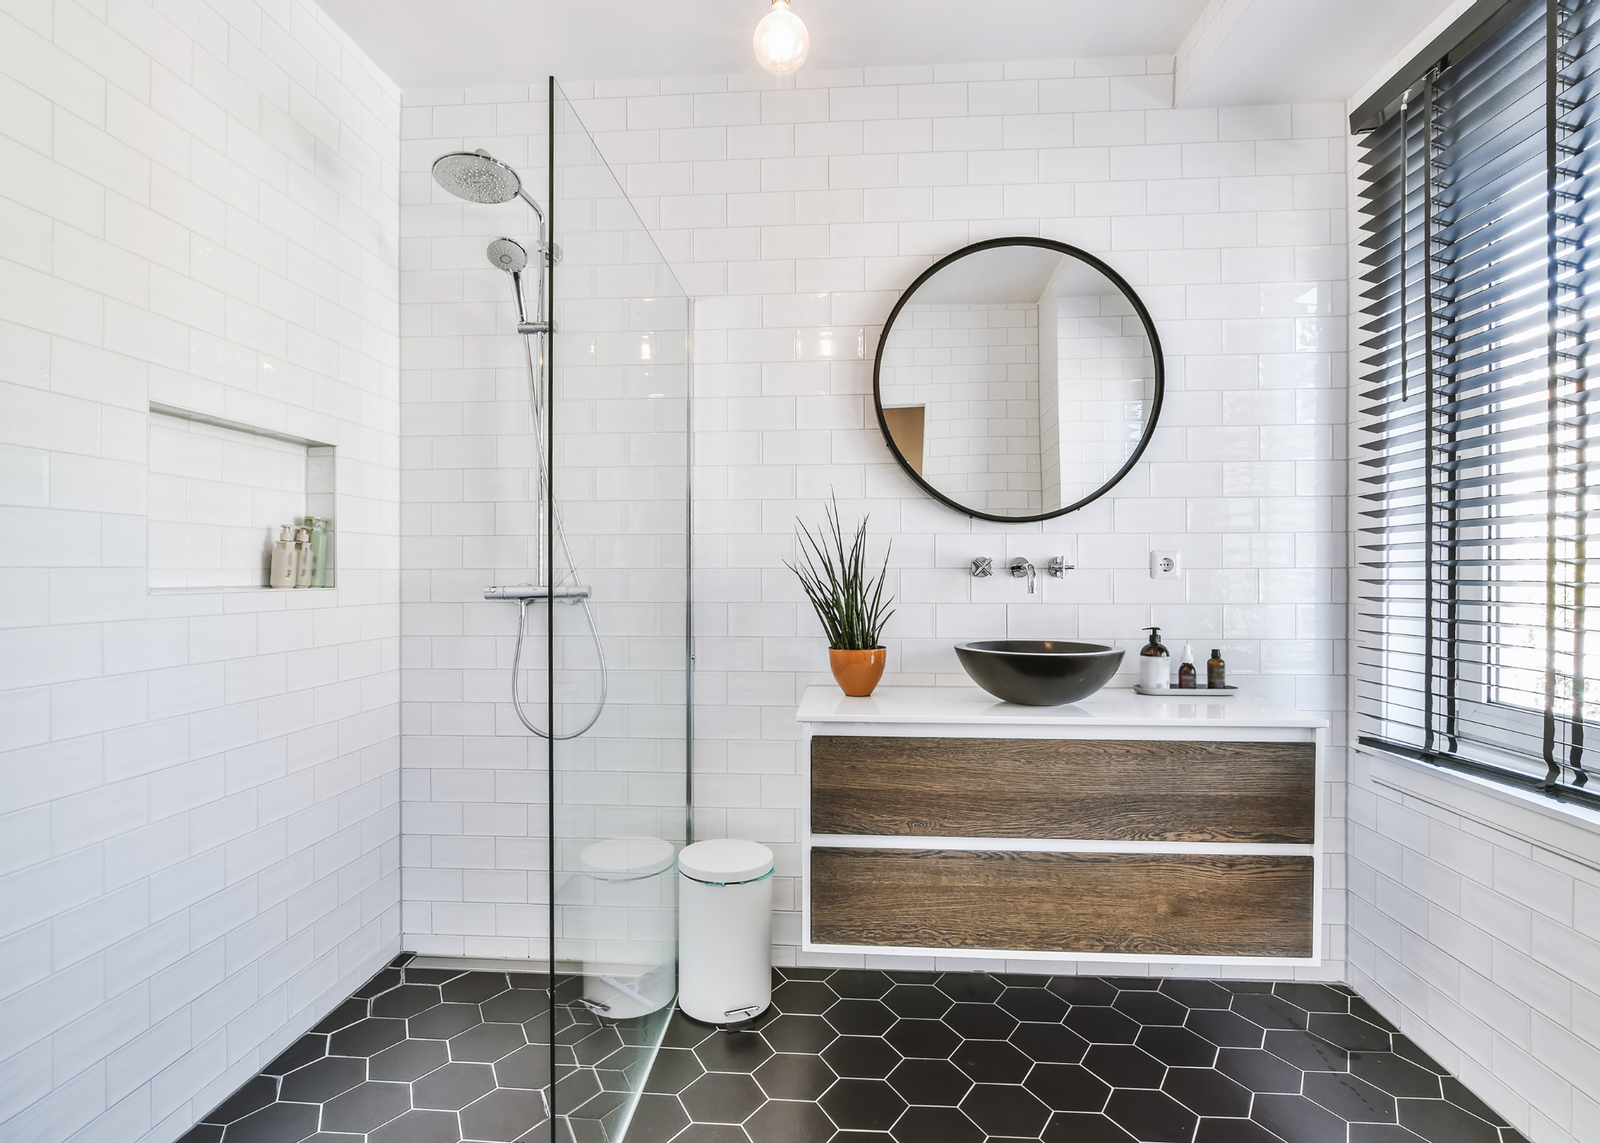 Light Up Your Bathroom: Tips for Adding Vanity Lighting When There's No Natural Light